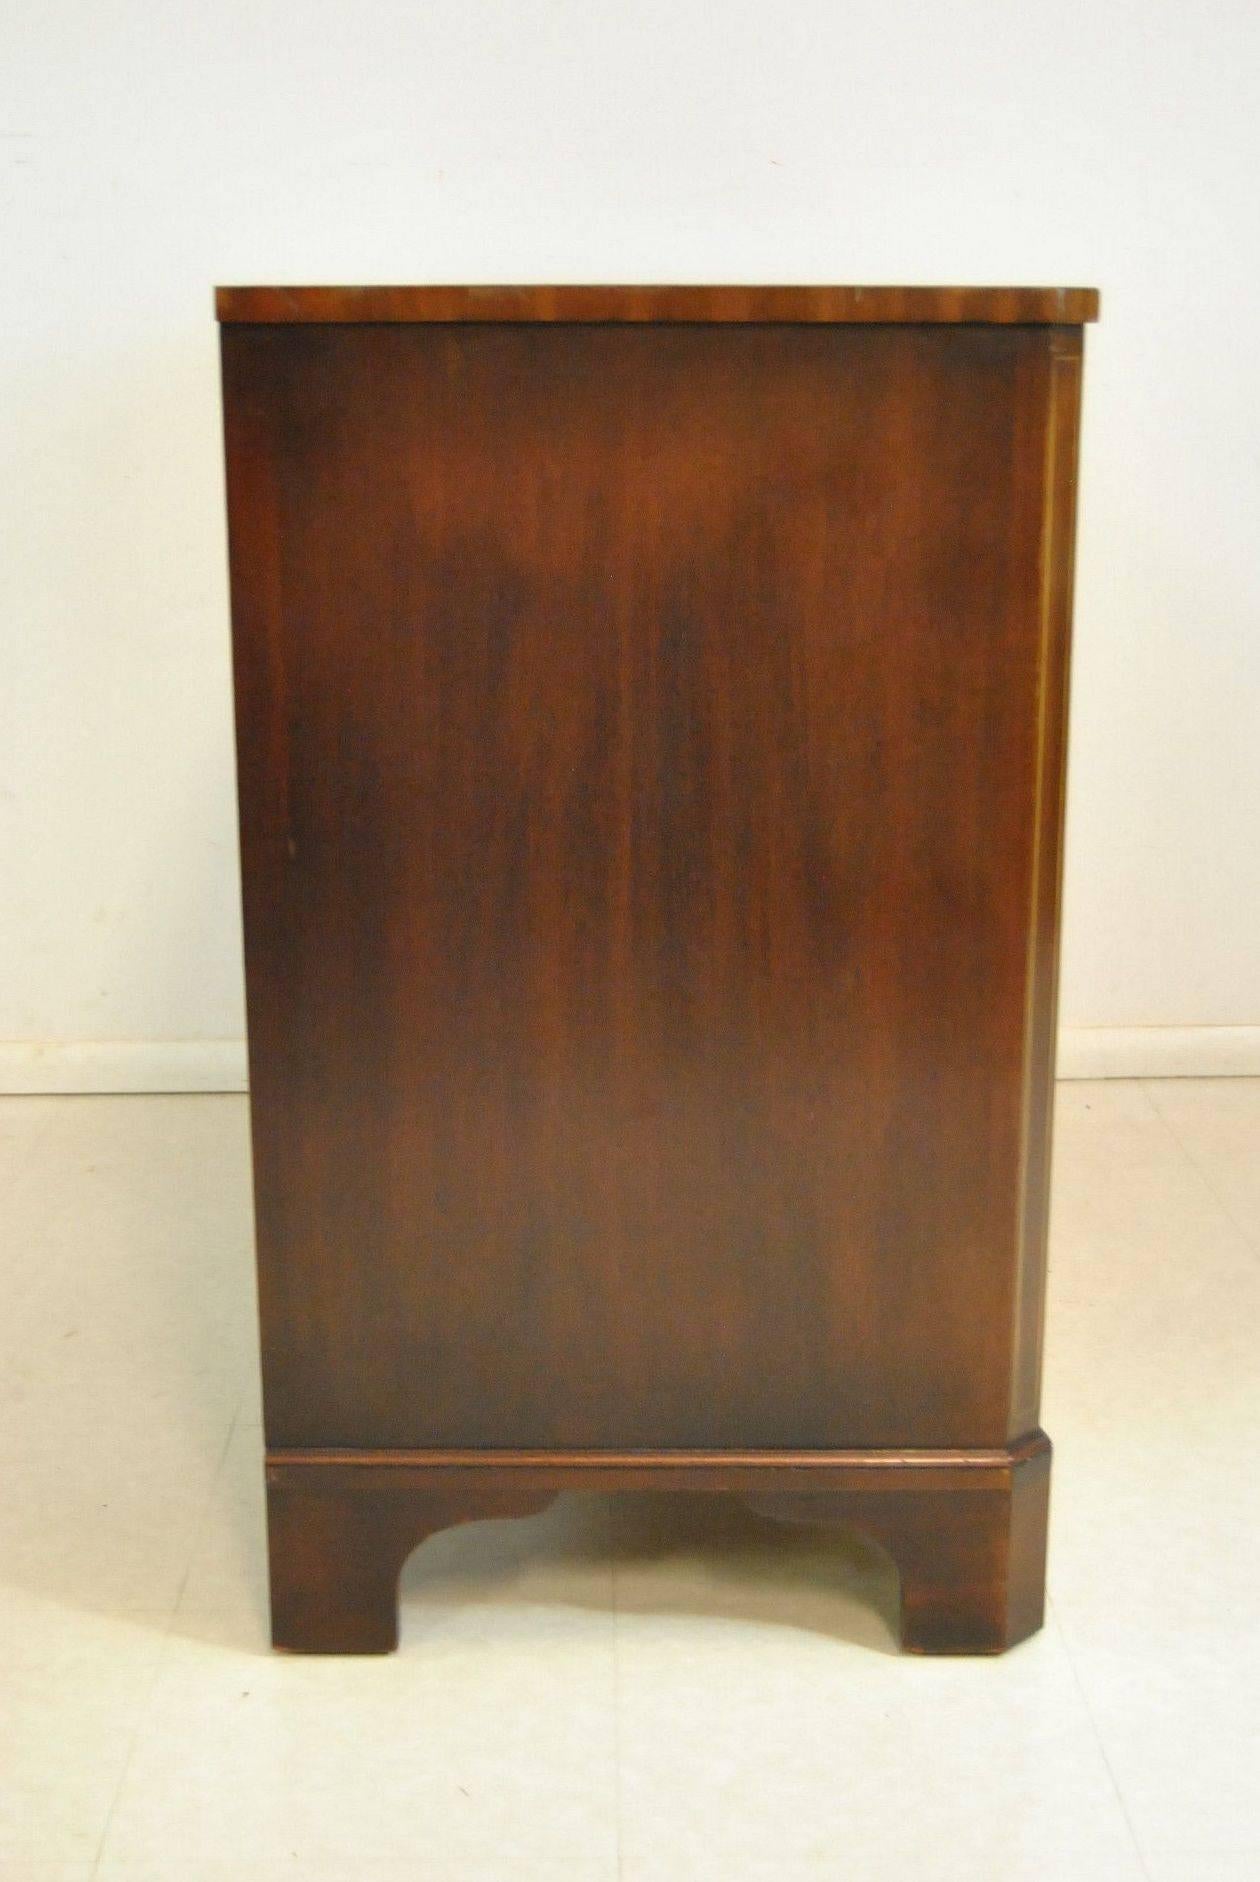 Chippendale Serpentine Mahogany Inlaid Chest or Dresser by Kindel